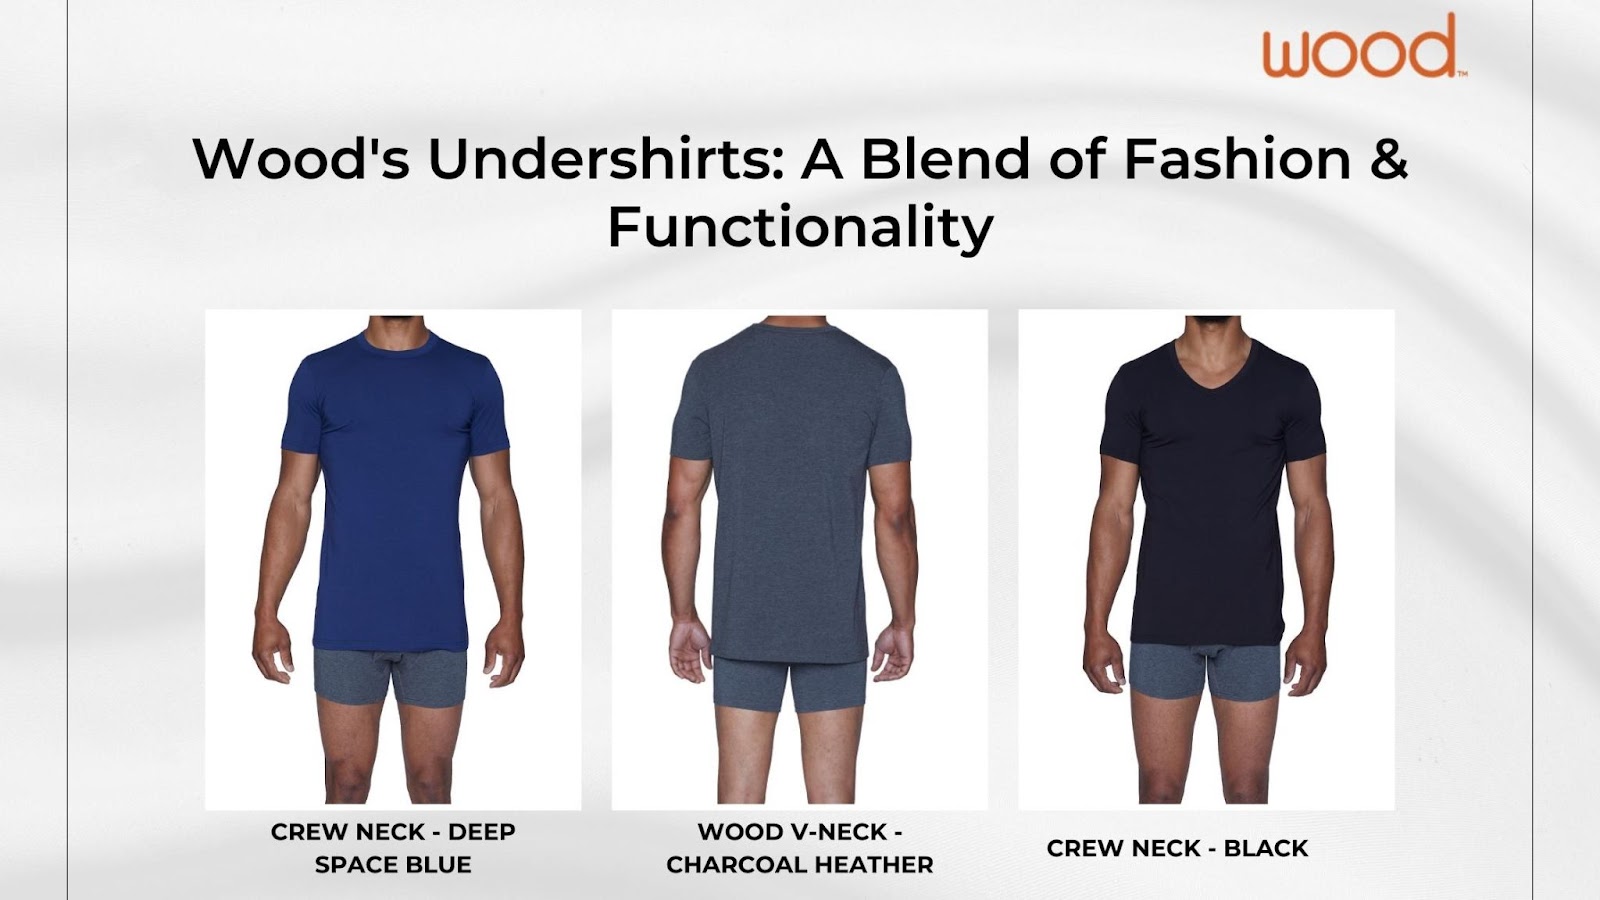 Image showcasing Wood's three popular undershirts: Crew Neck in Deep Space Blue, Wood Neck in Charcoal Heather, and Crew Neck in Black, with the caption 'Wood's Undershirts: A Blend of Fashion and Functionality.